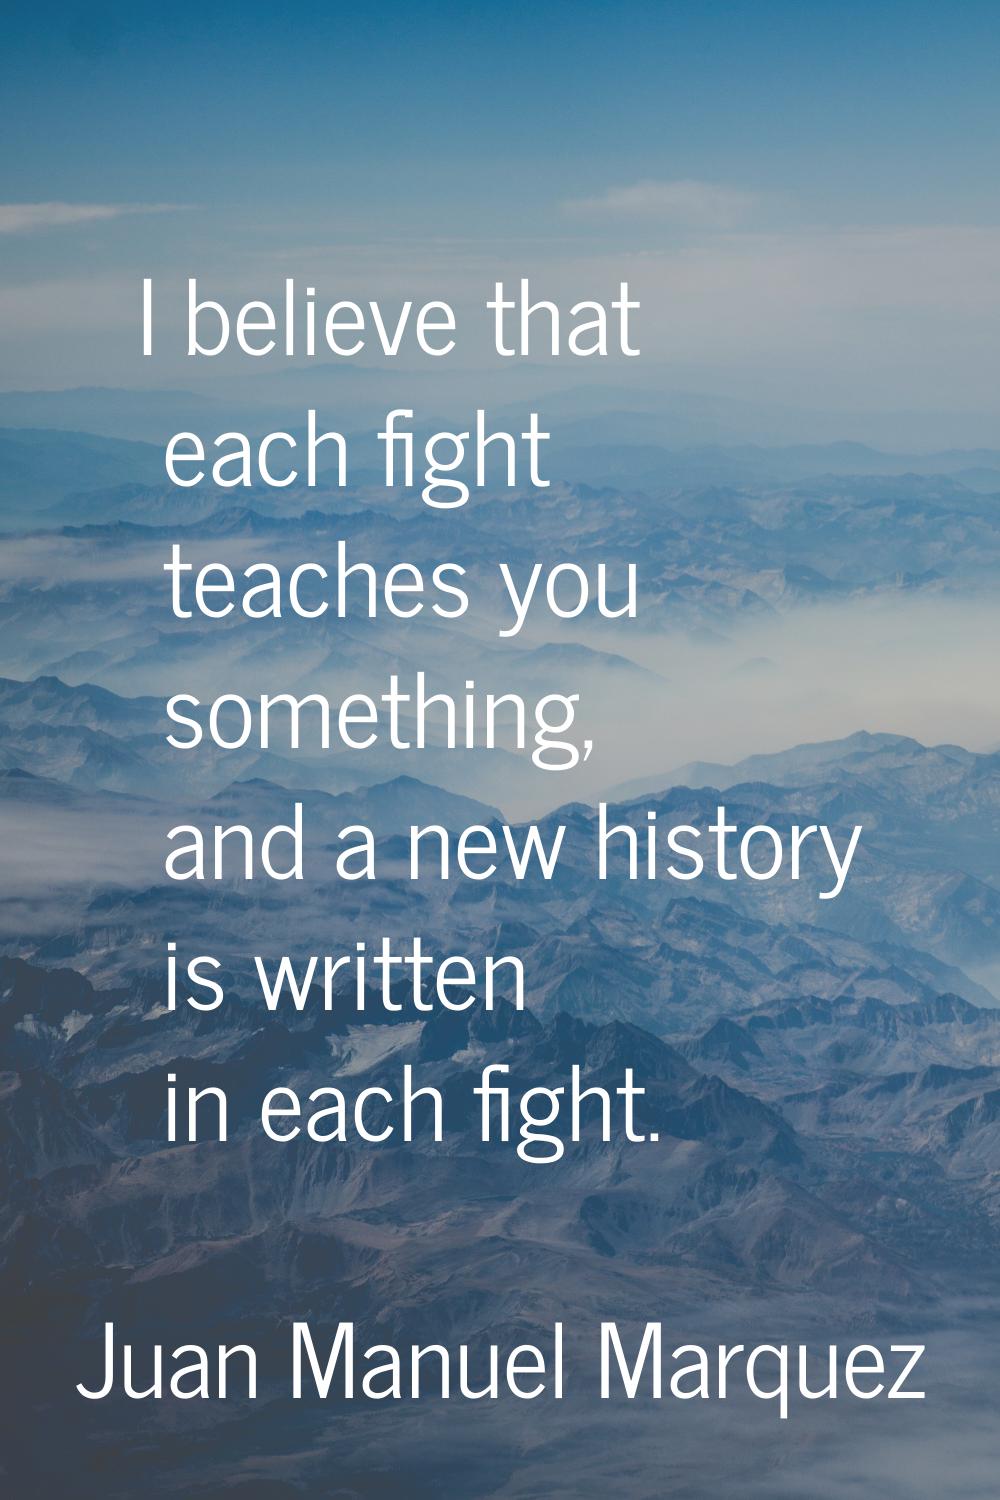 I believe that each fight teaches you something, and a new history is written in each fight.